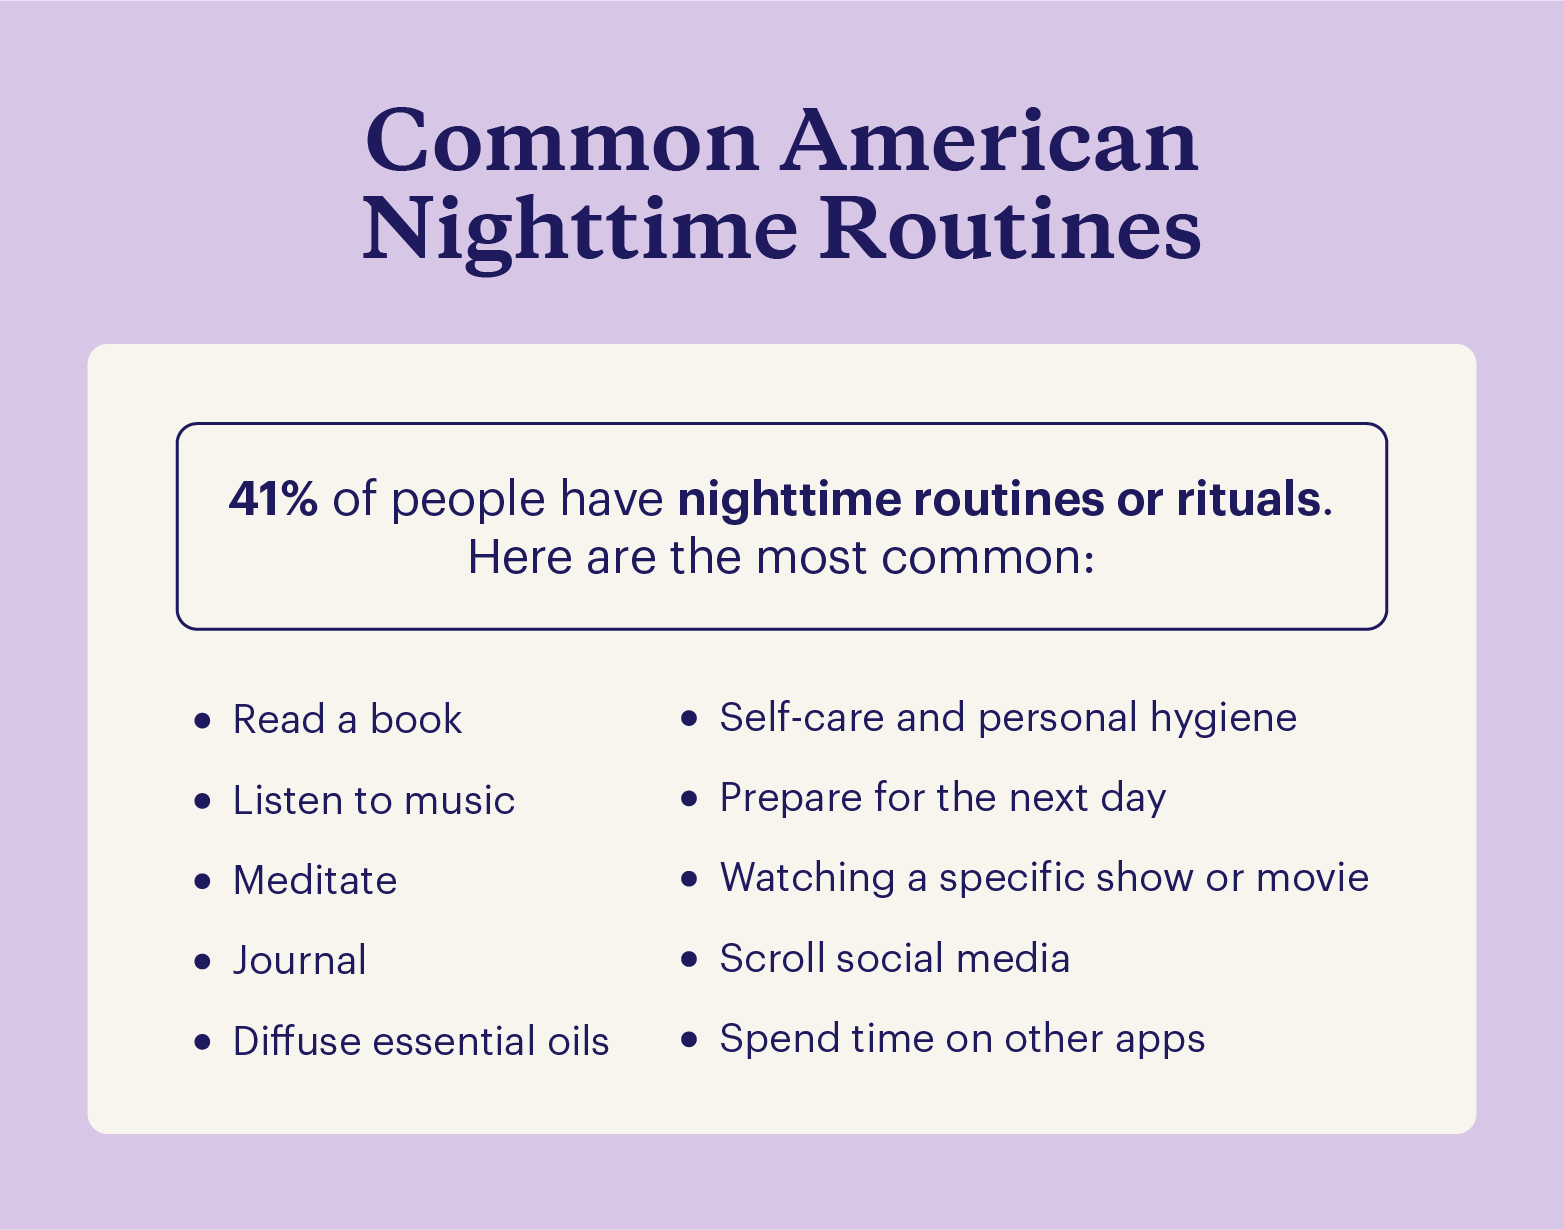 A list of 10 common nighttime routines, including reading and preparing for the next day.